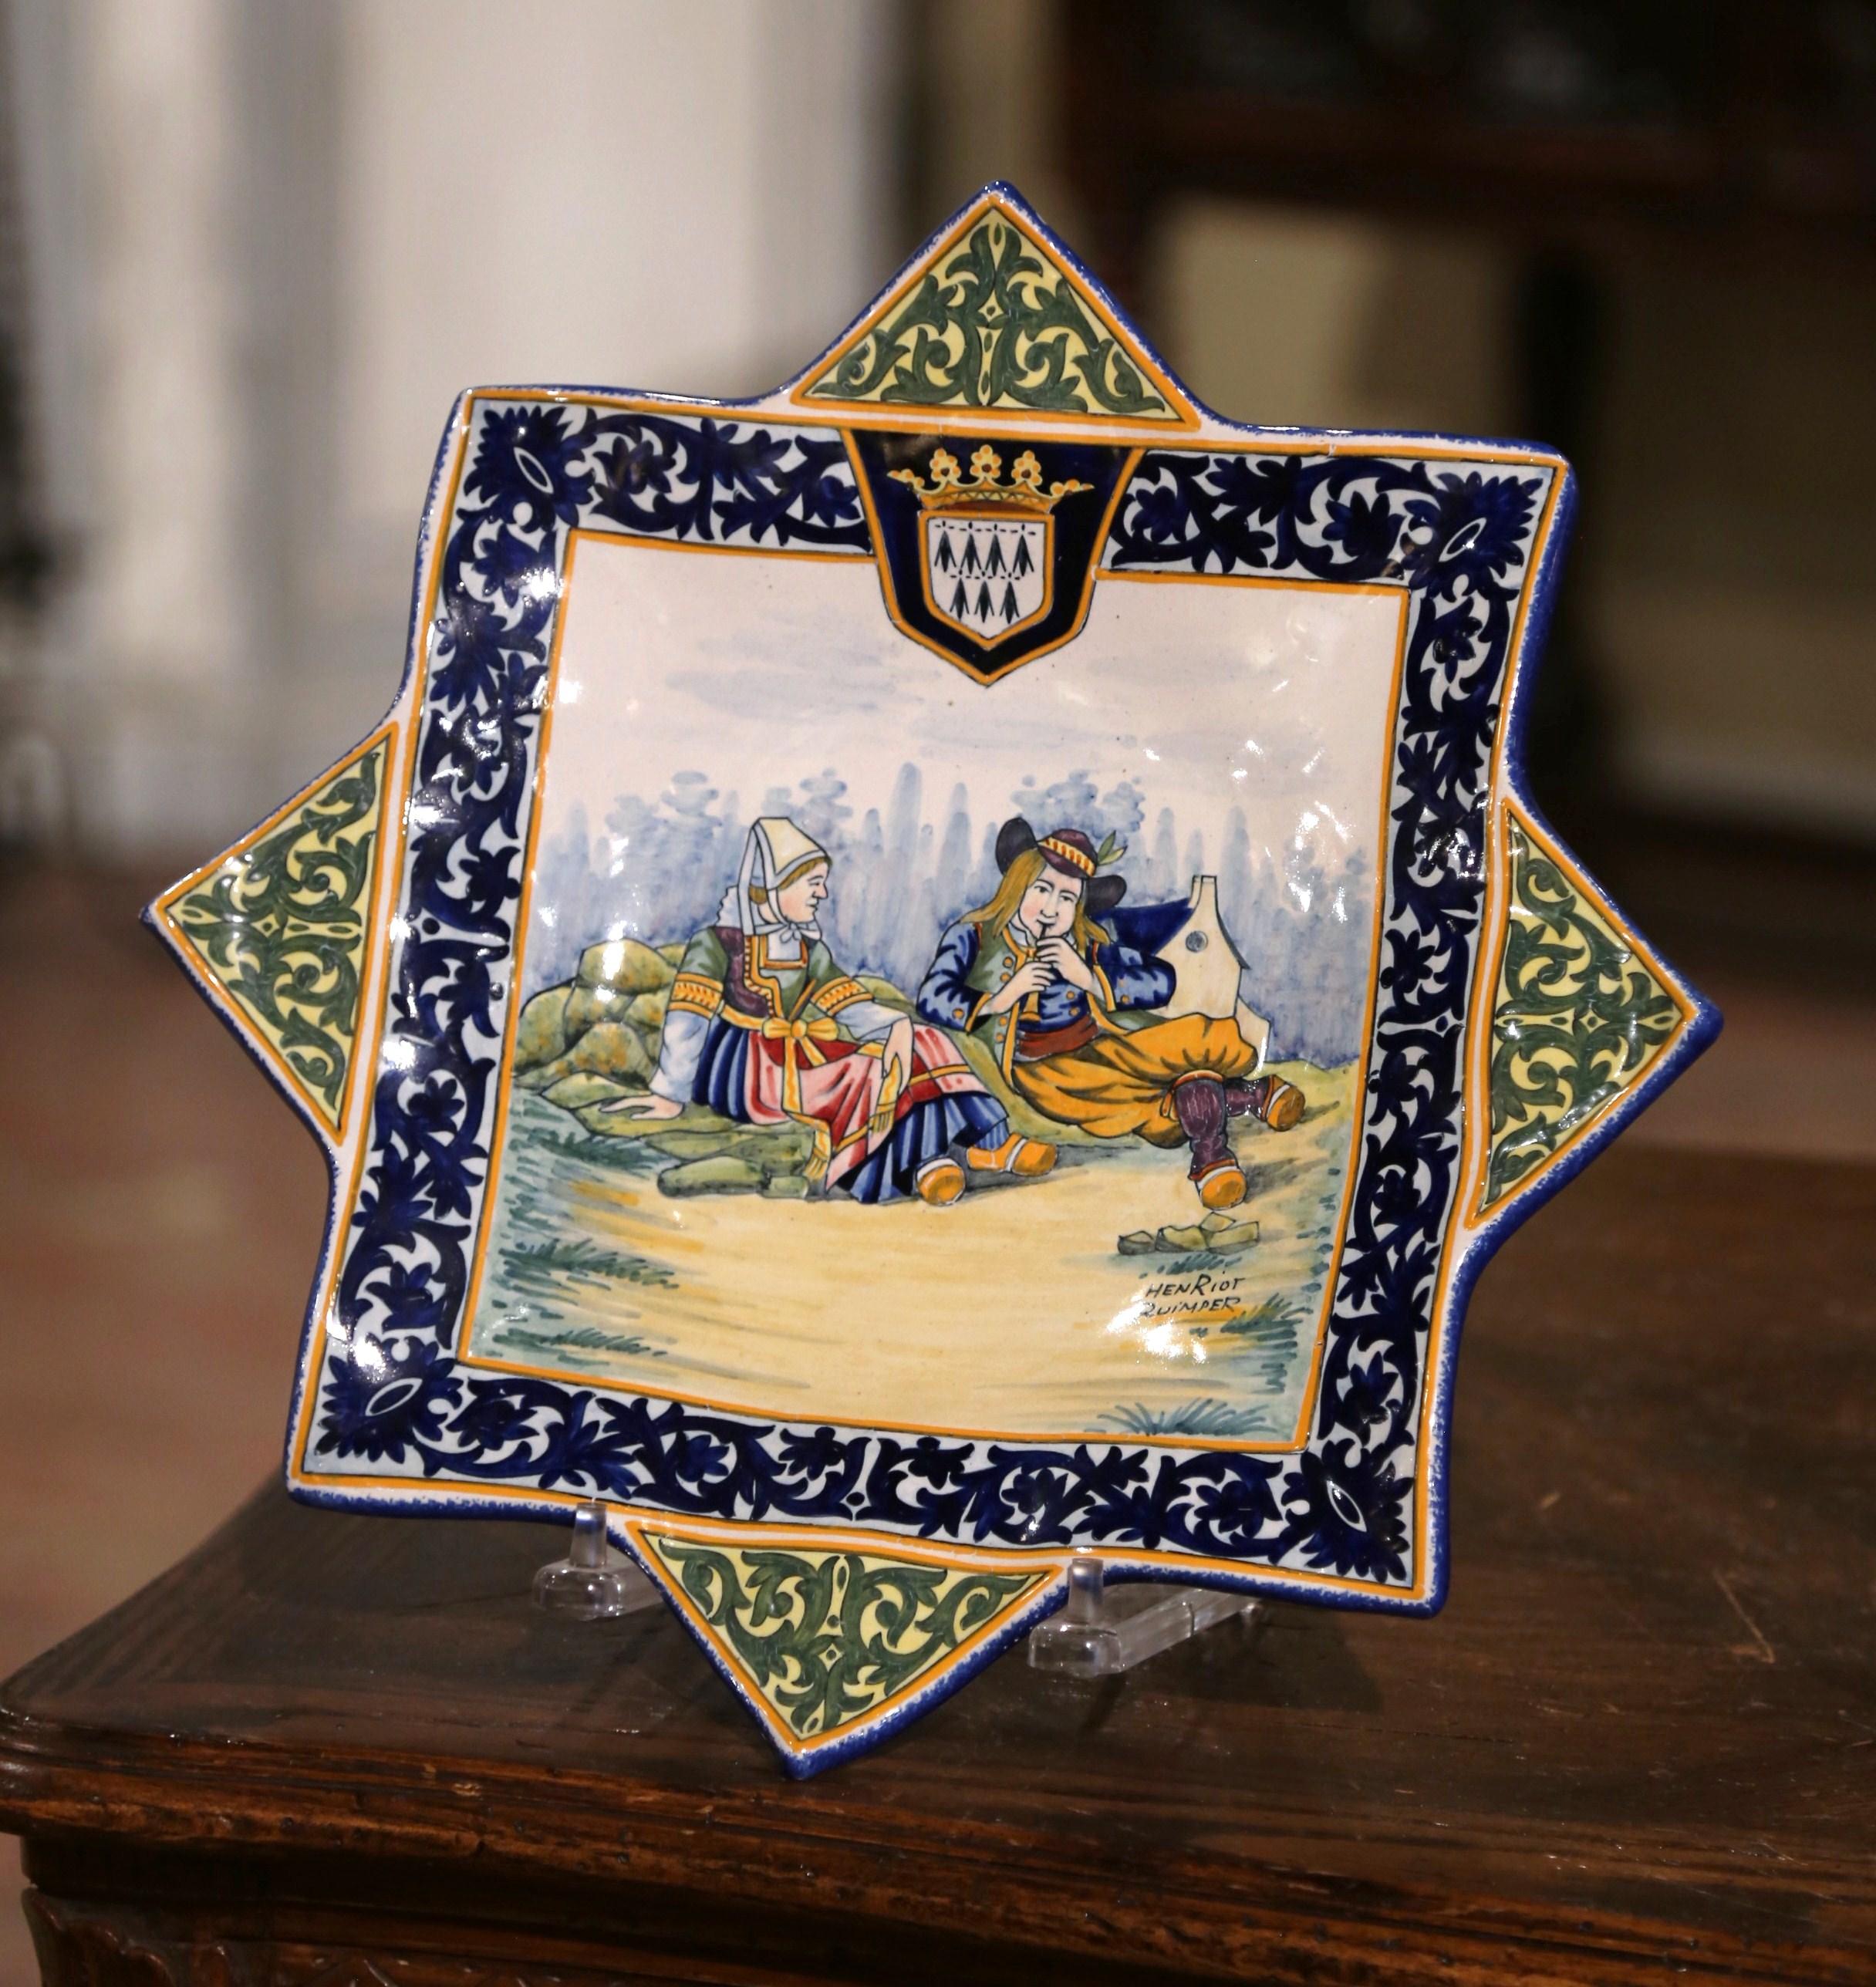 Decorate a kitchen wall or a shelf with this unusual antique star-shape platter. Created in France circa 1910, the large ceramic plate with 